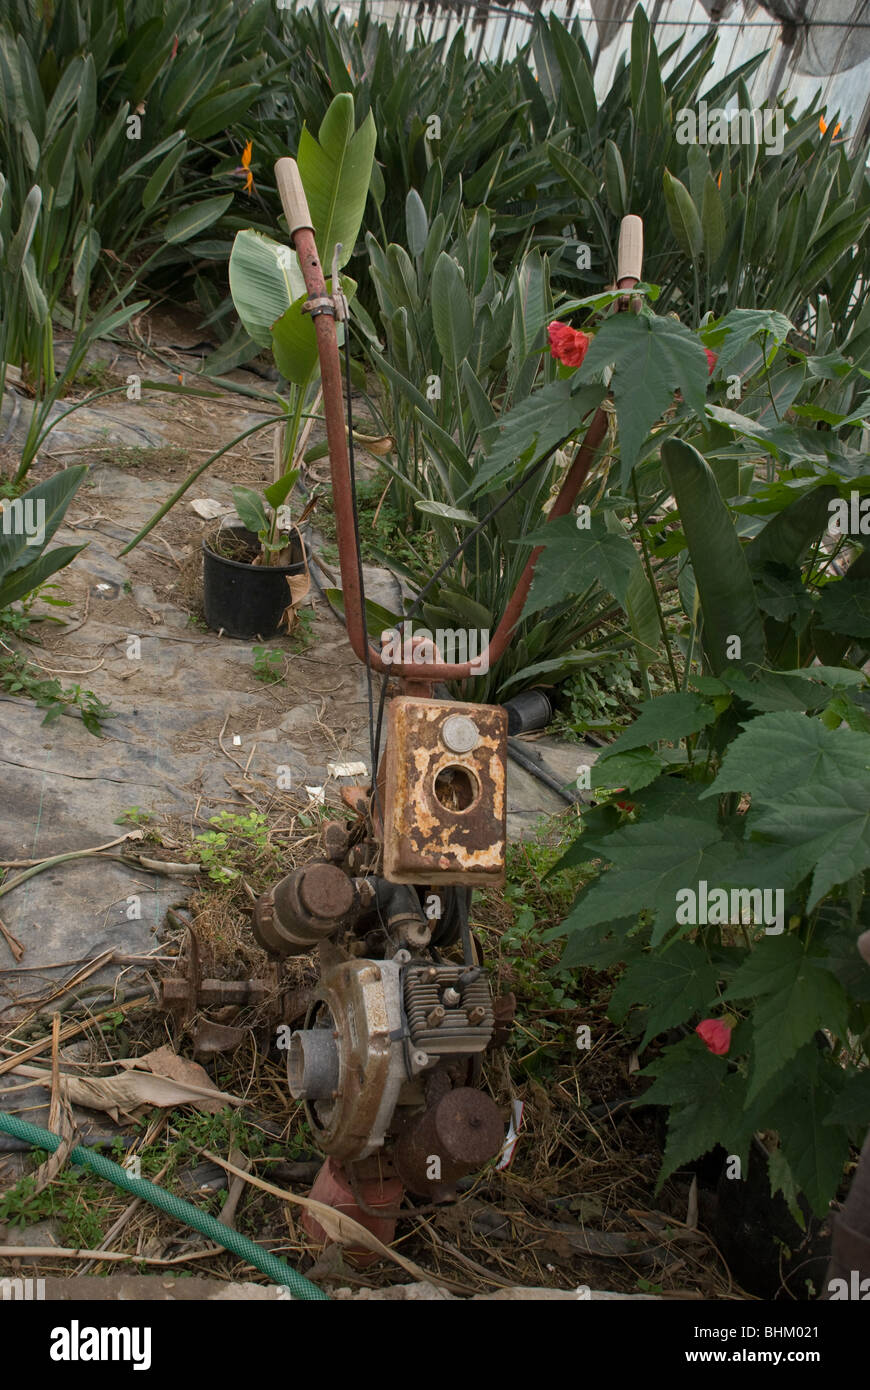 old disused rotary tiller in a greenhouse Stock Photo